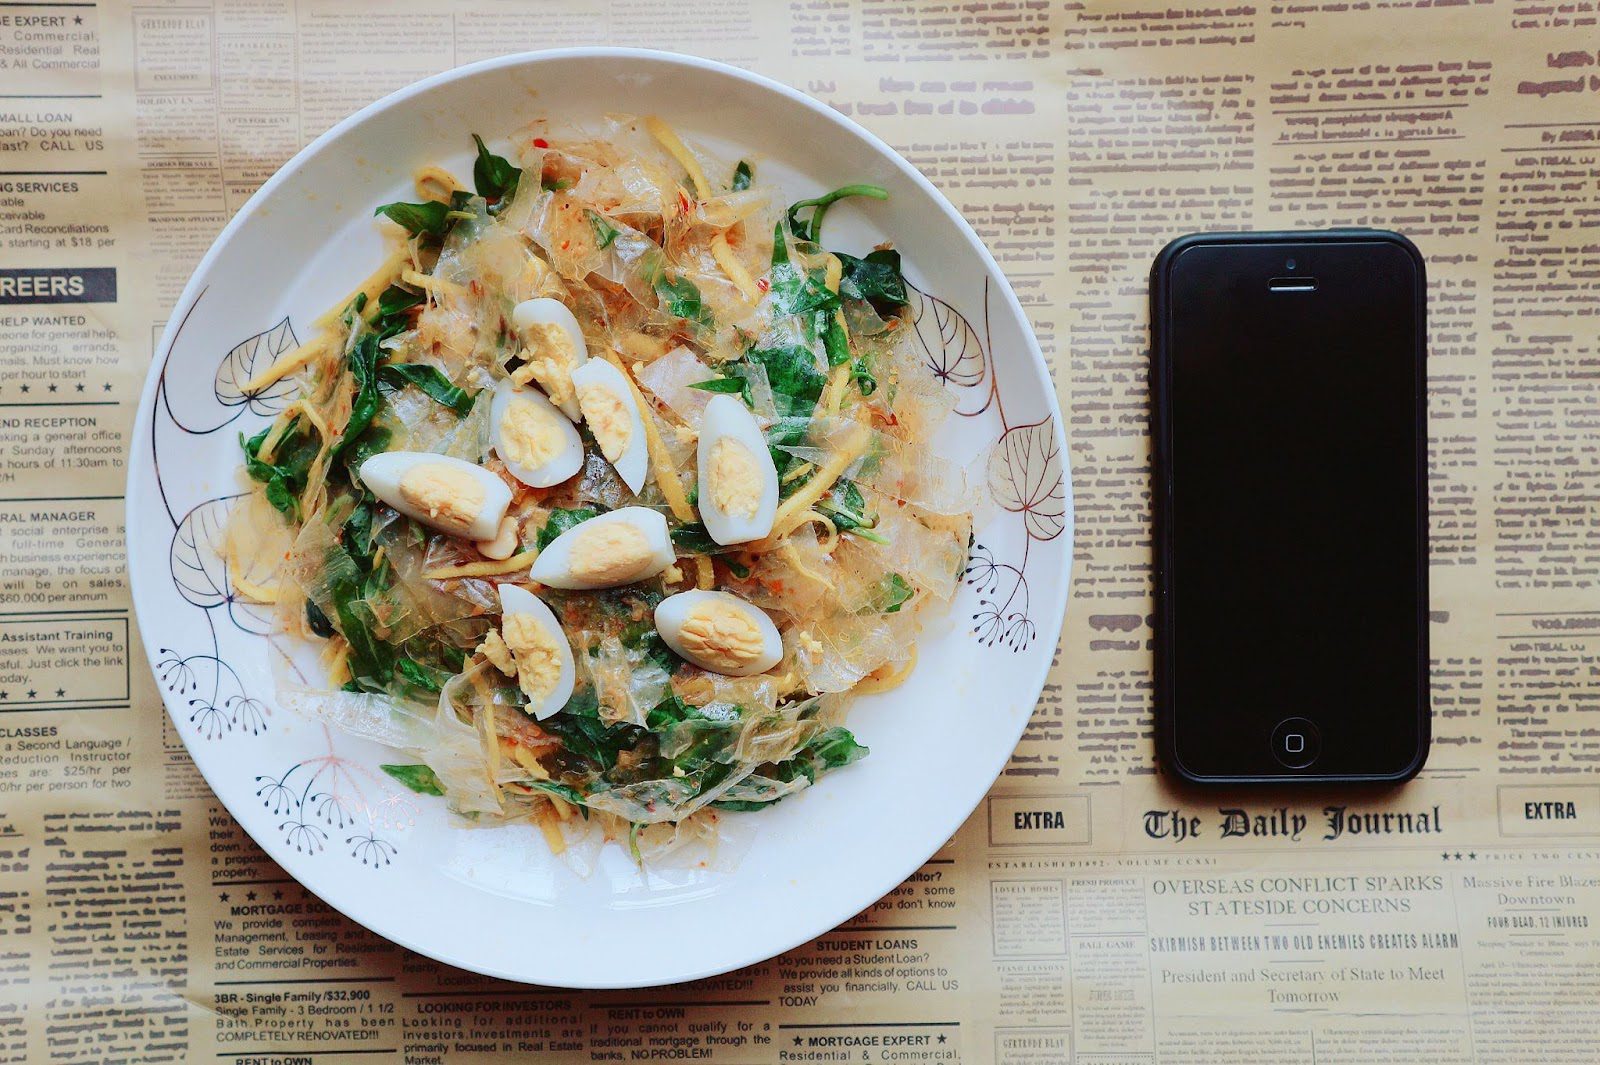 A plate of food beside a smartphone.